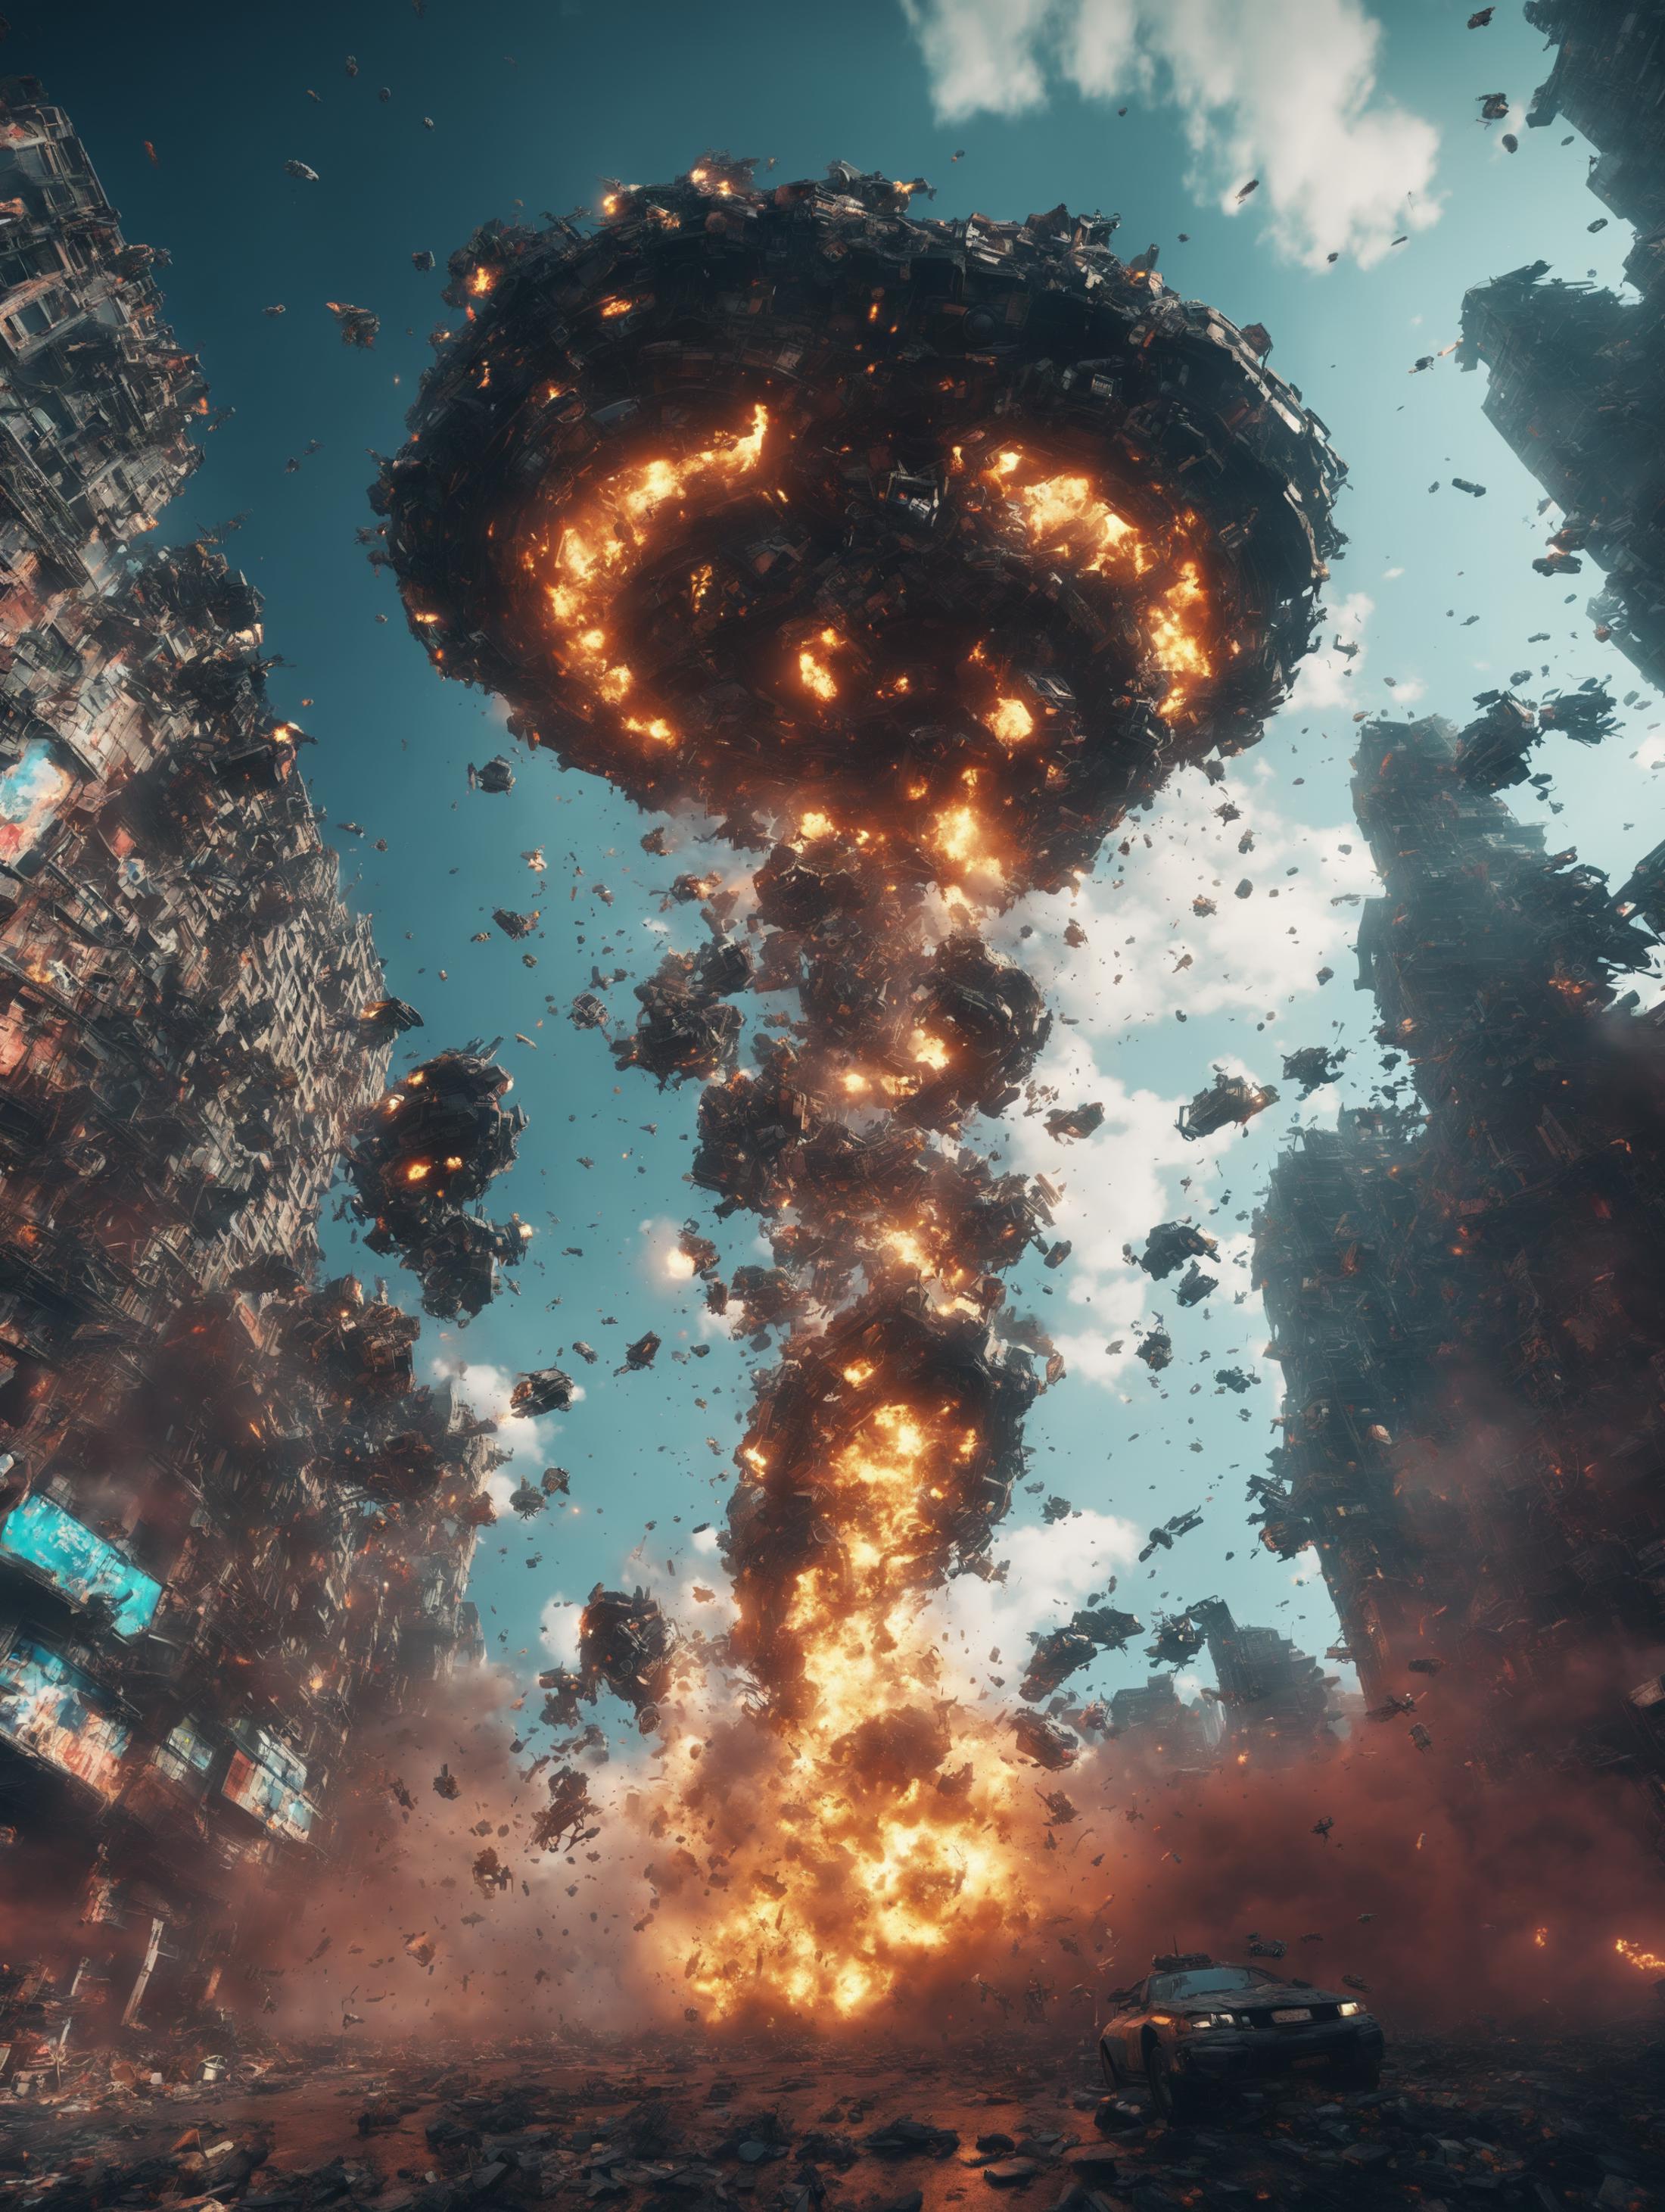 A computer-generated scene of an explosion with buildings in the background.